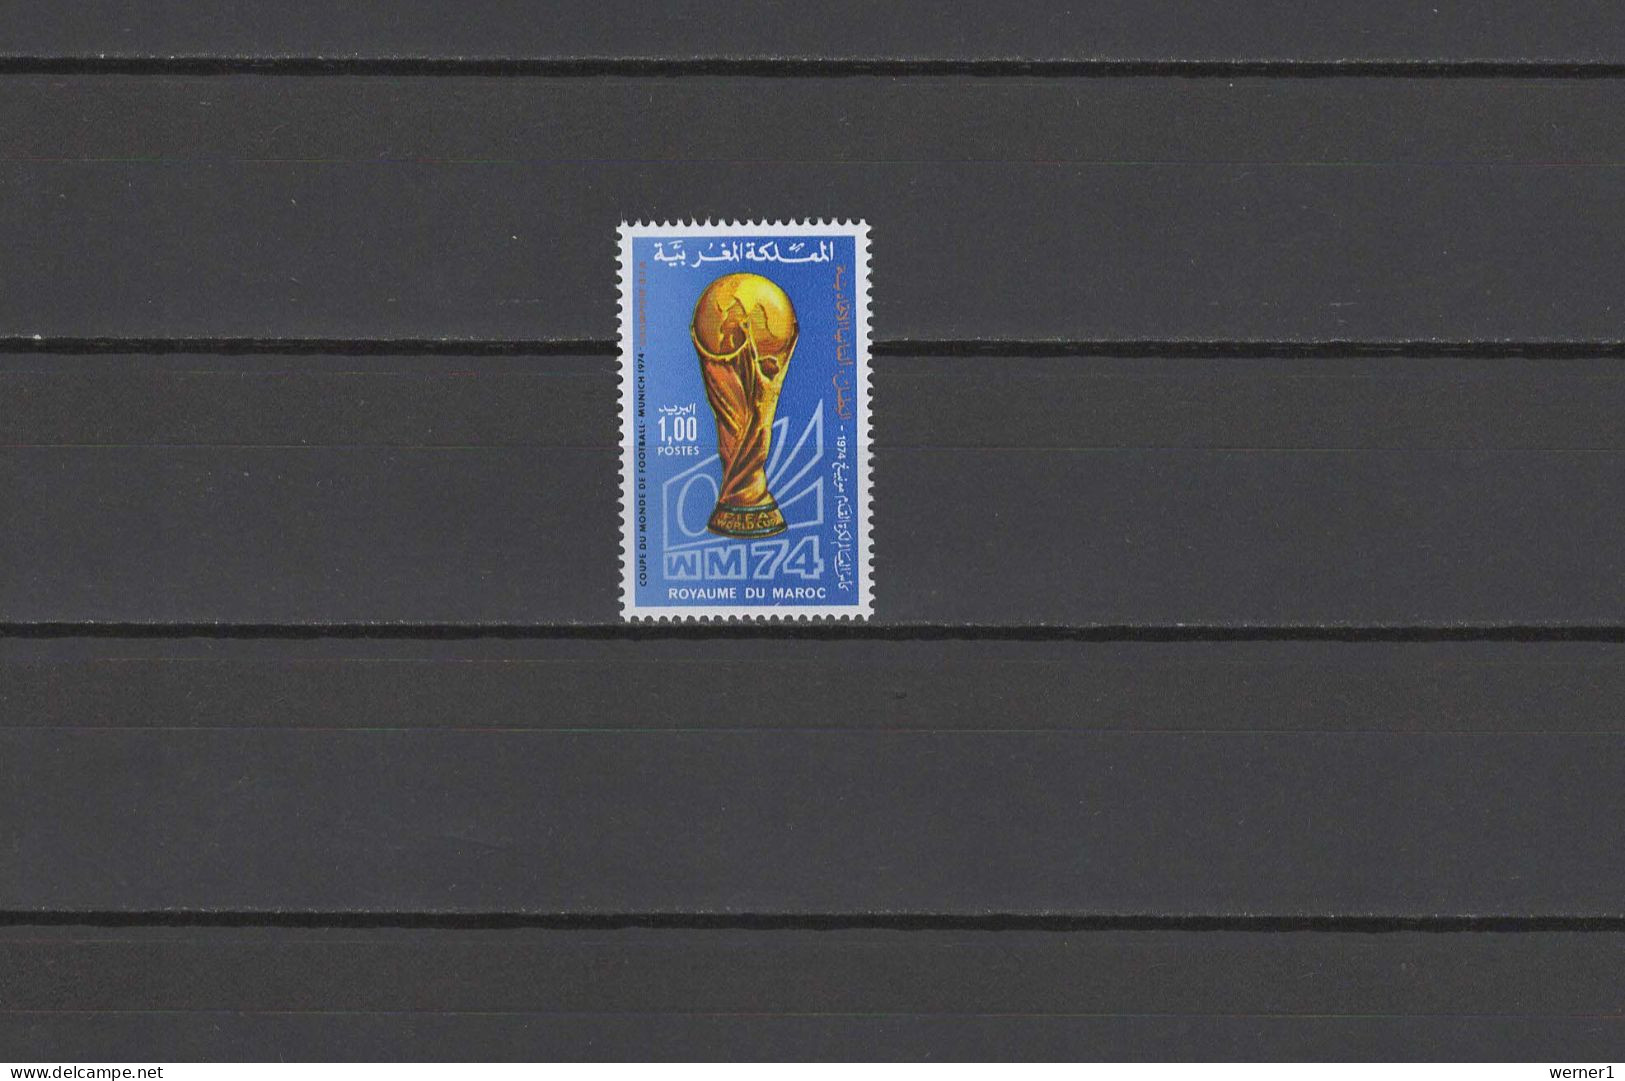 Morocco 1974 Football Soccer World Cup Stamp With Golden Winners Overprint MNH -scarce- - 1974 – Alemania Occidental